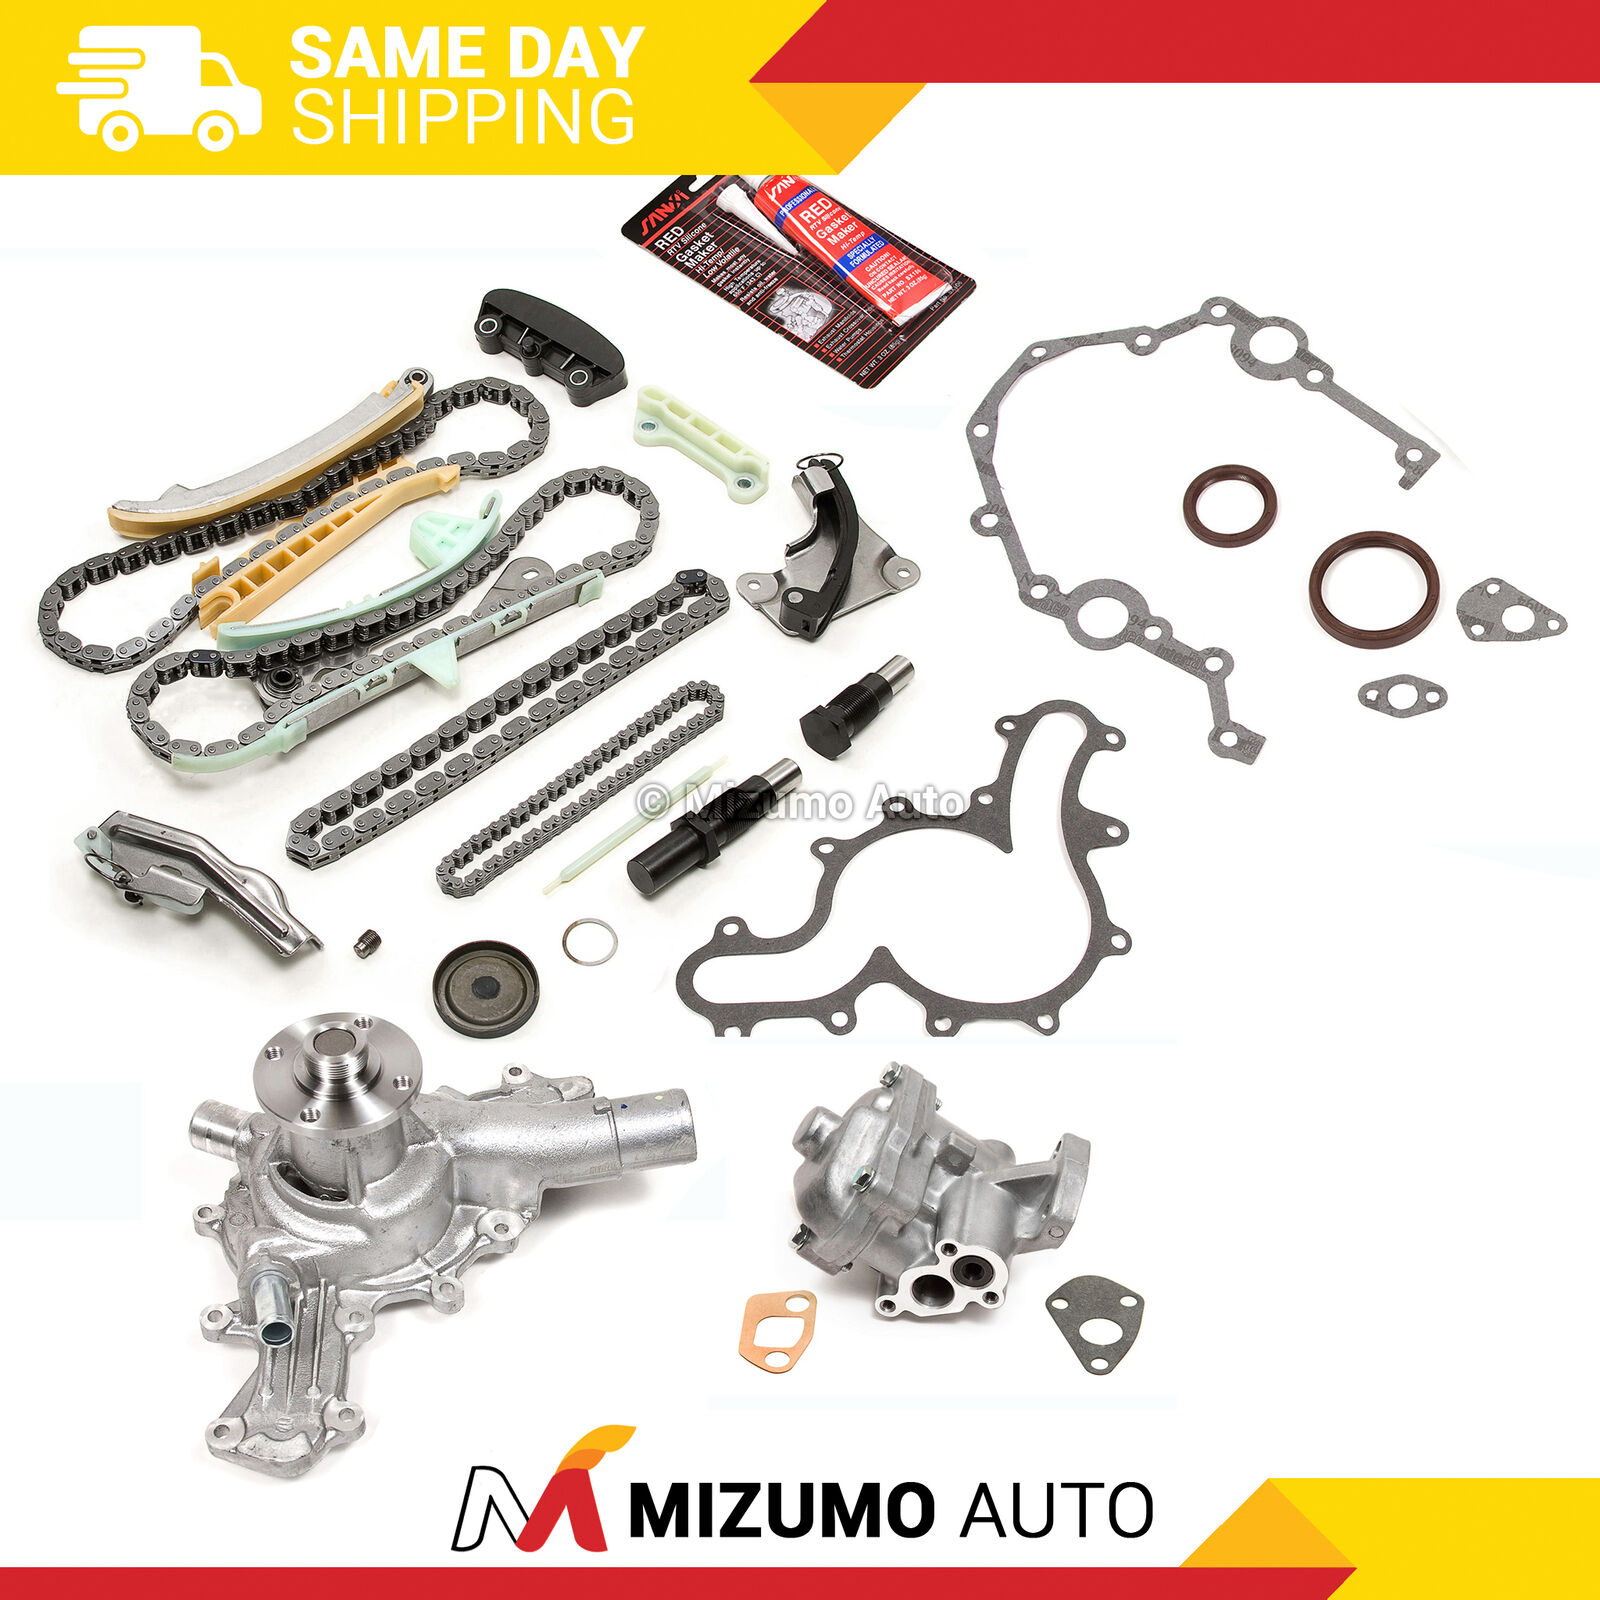 Timing Chain Kit w/o Gears Cover Gaskets Oil Water Pump Fit 97-11 Ford 4.0L SOHC